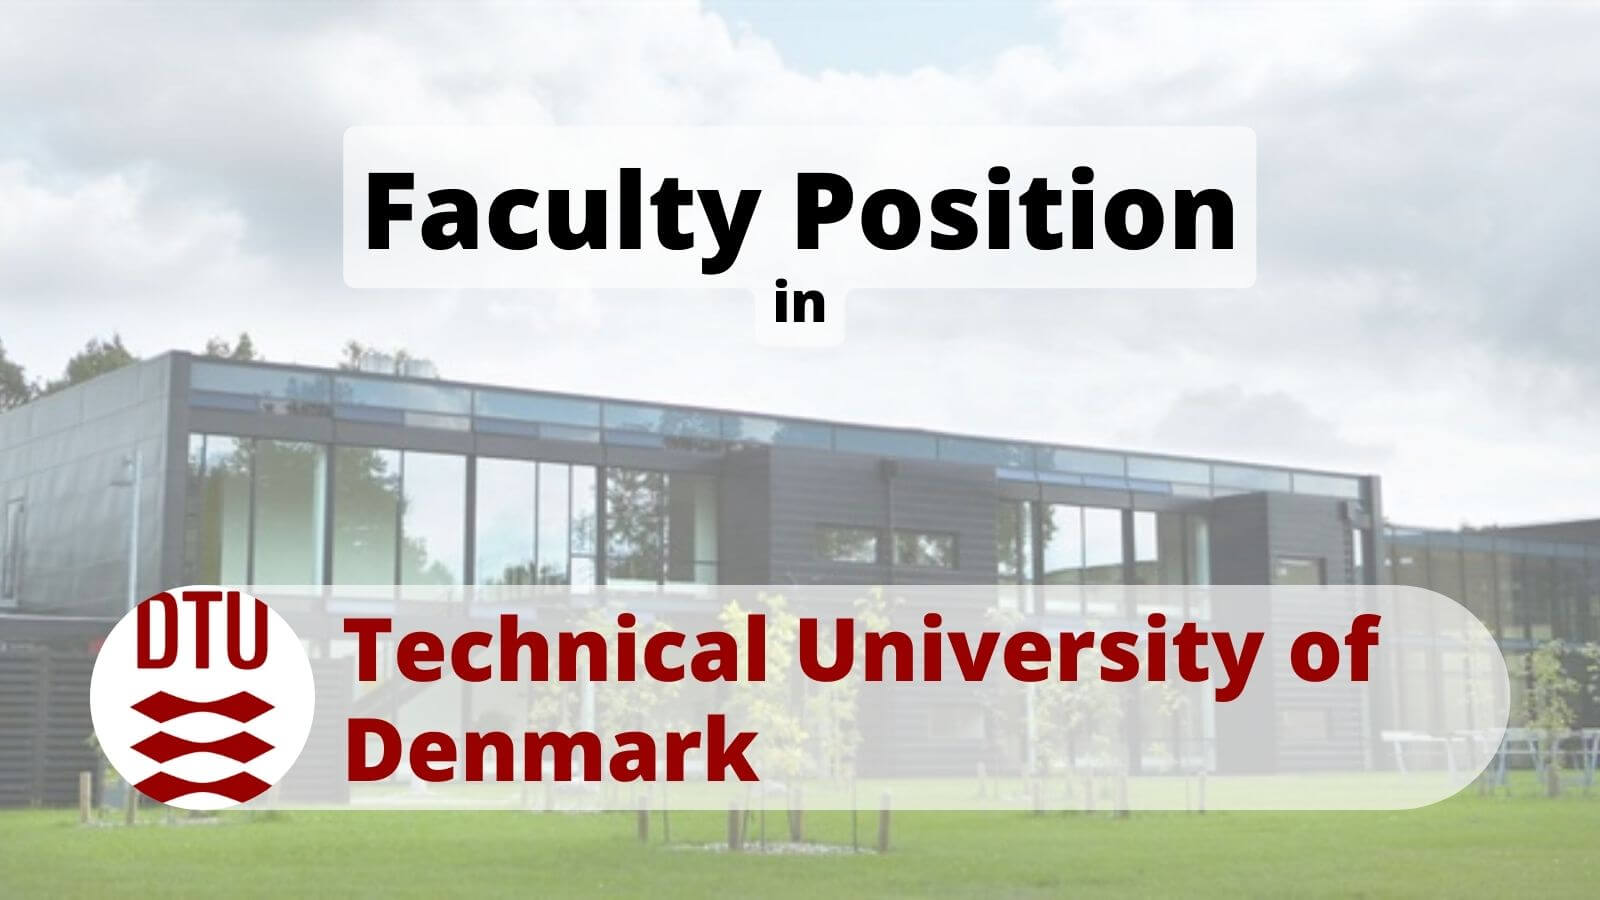 Faculty Position at DTU Technical University of Denmark